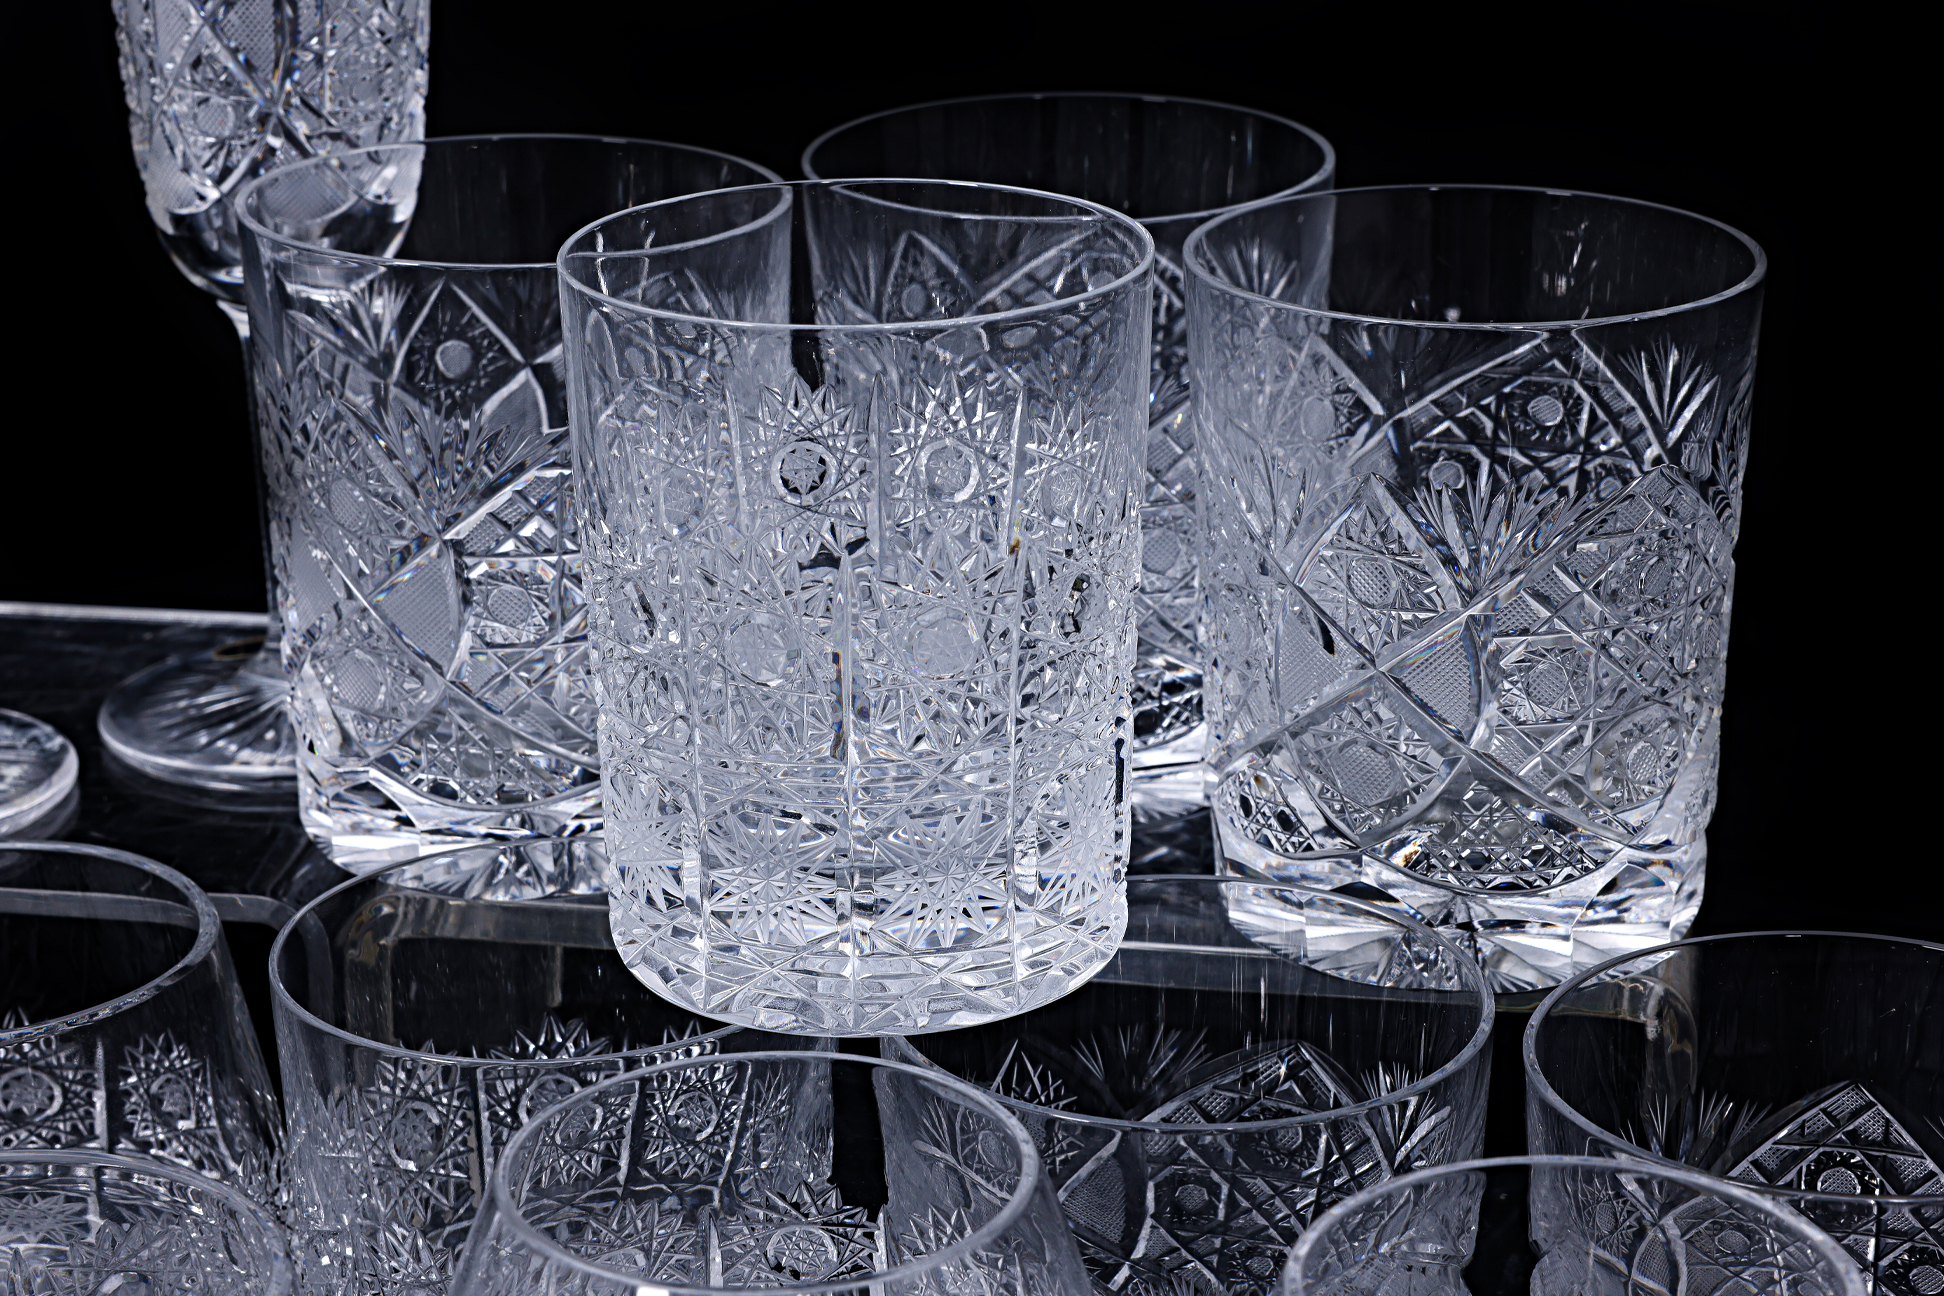 FOUR SETS OF BOHEMIA CRYSTAL GLASSES - Image 2 of 6